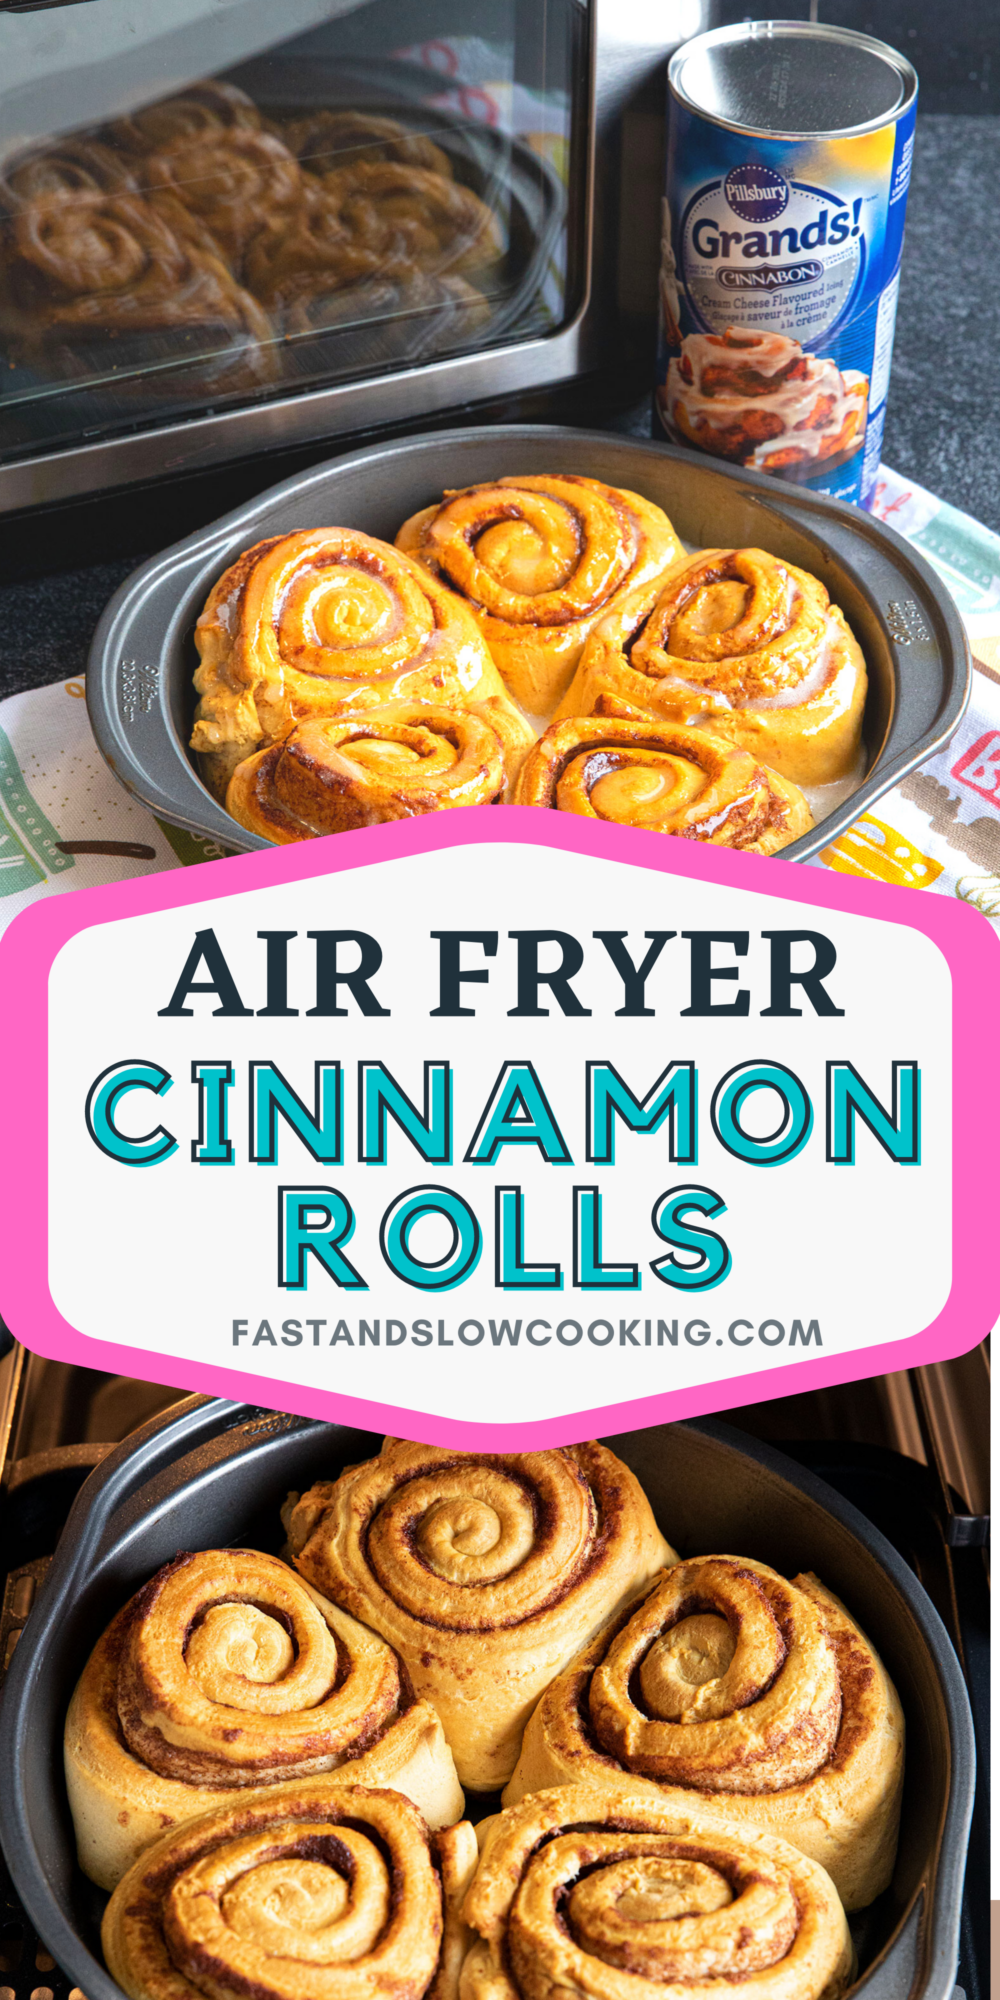 How to bake up a small batch of cinnamon buns in your air fryer! Use canned refrigerated cinnamon rolls for the perfect quick hot breakfast or snack!